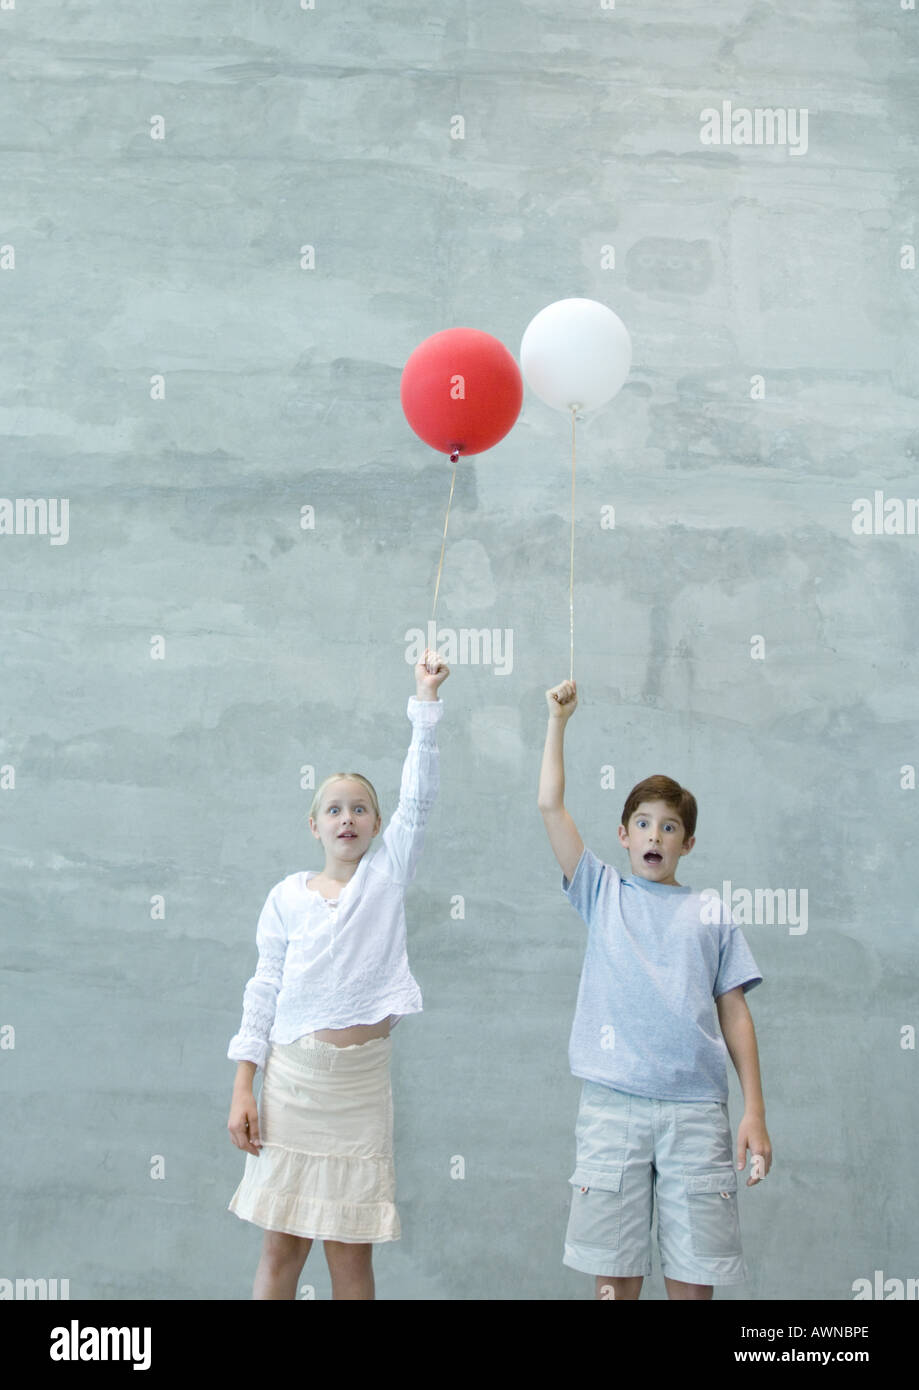 Two children holding balloons, making faces Stock Photo